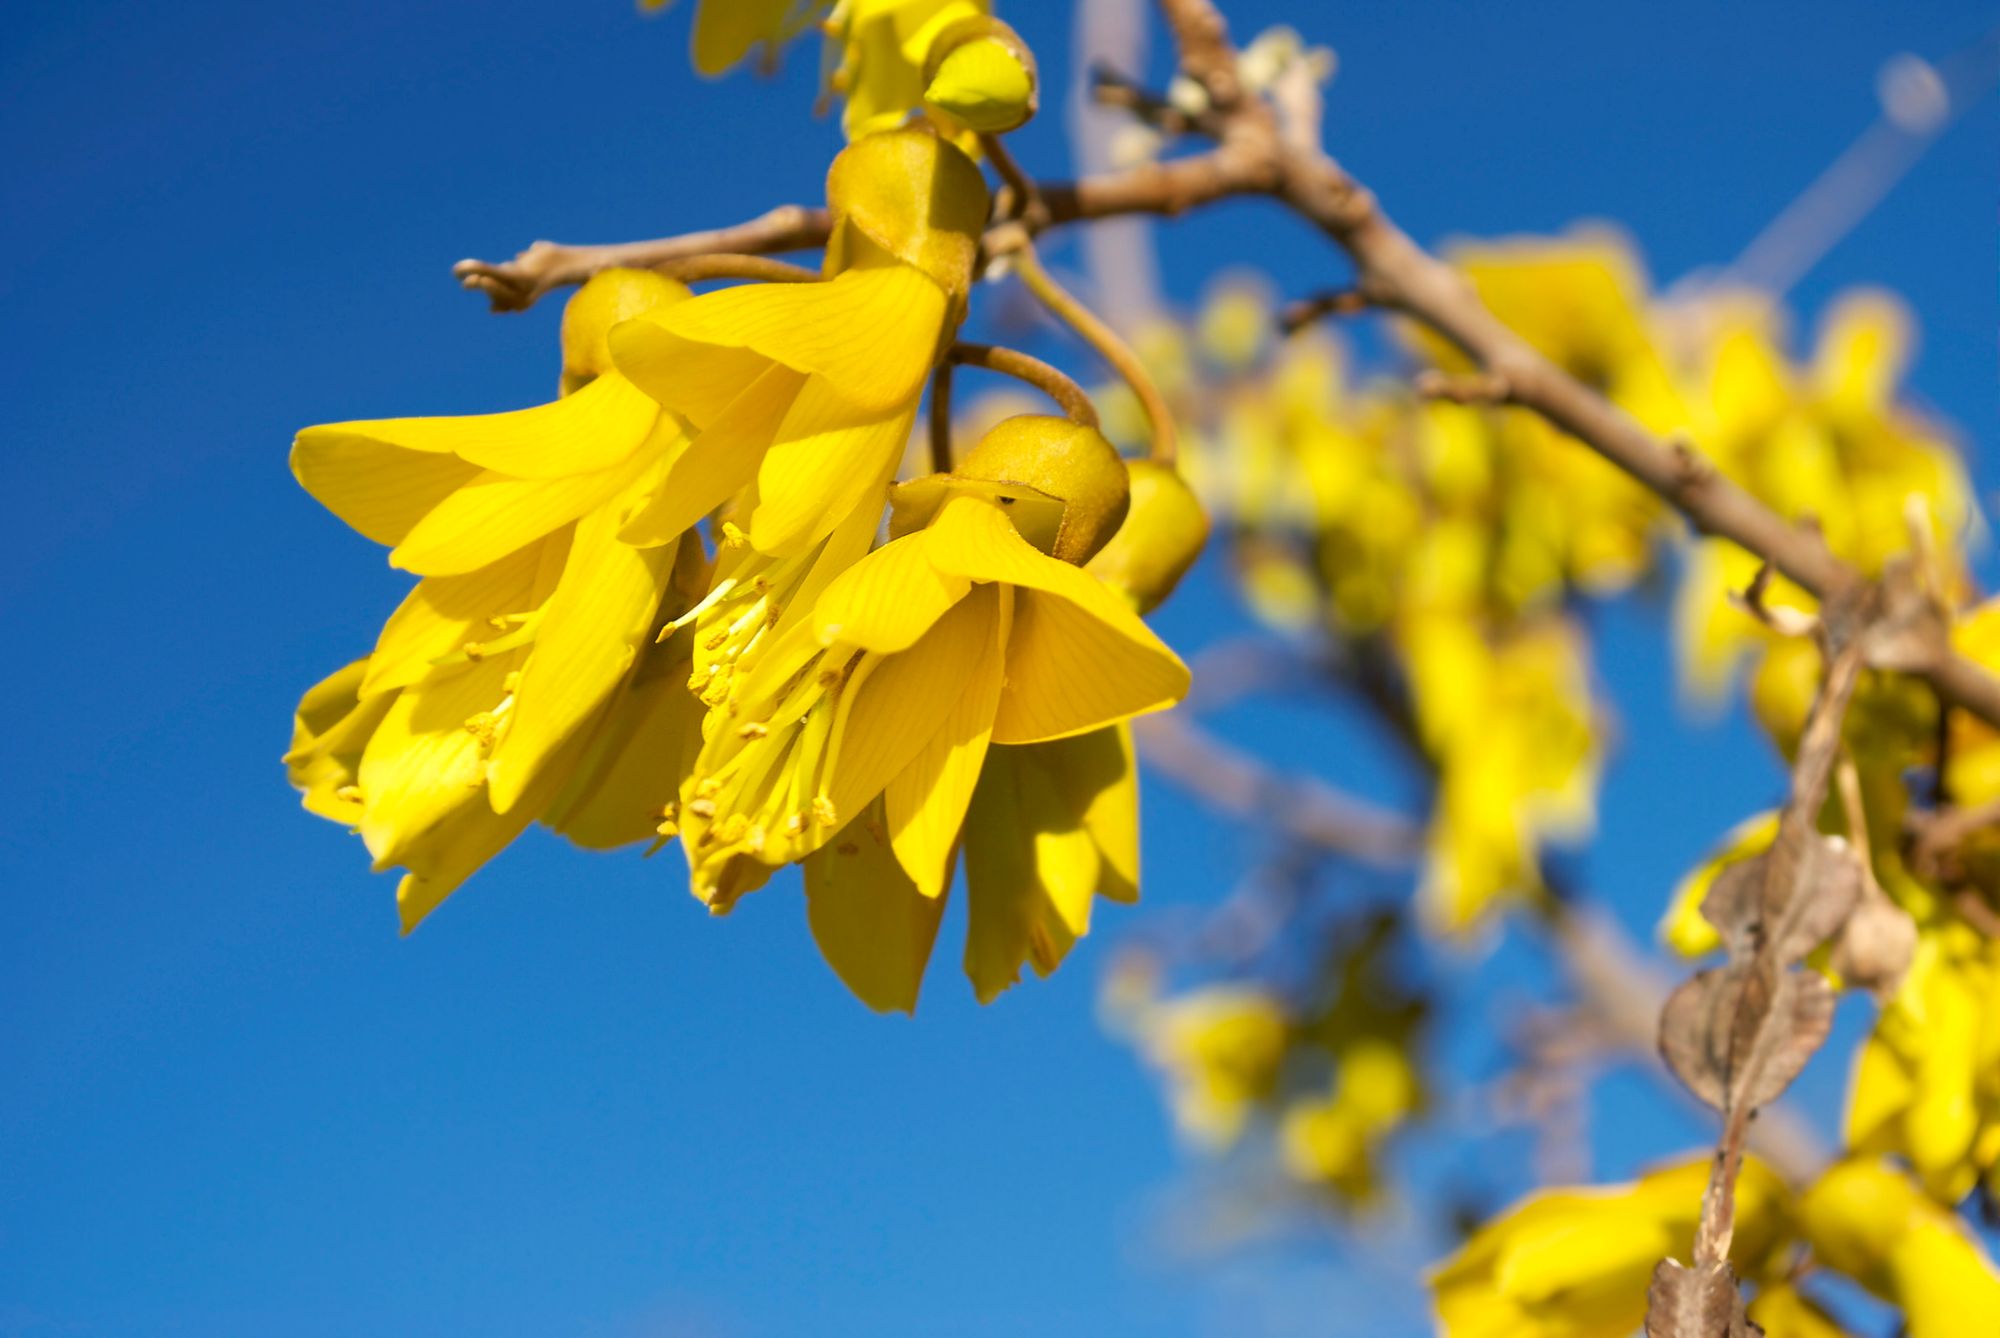 The golden yellow blossoms of the kōwhai tree, native to New Zealand.